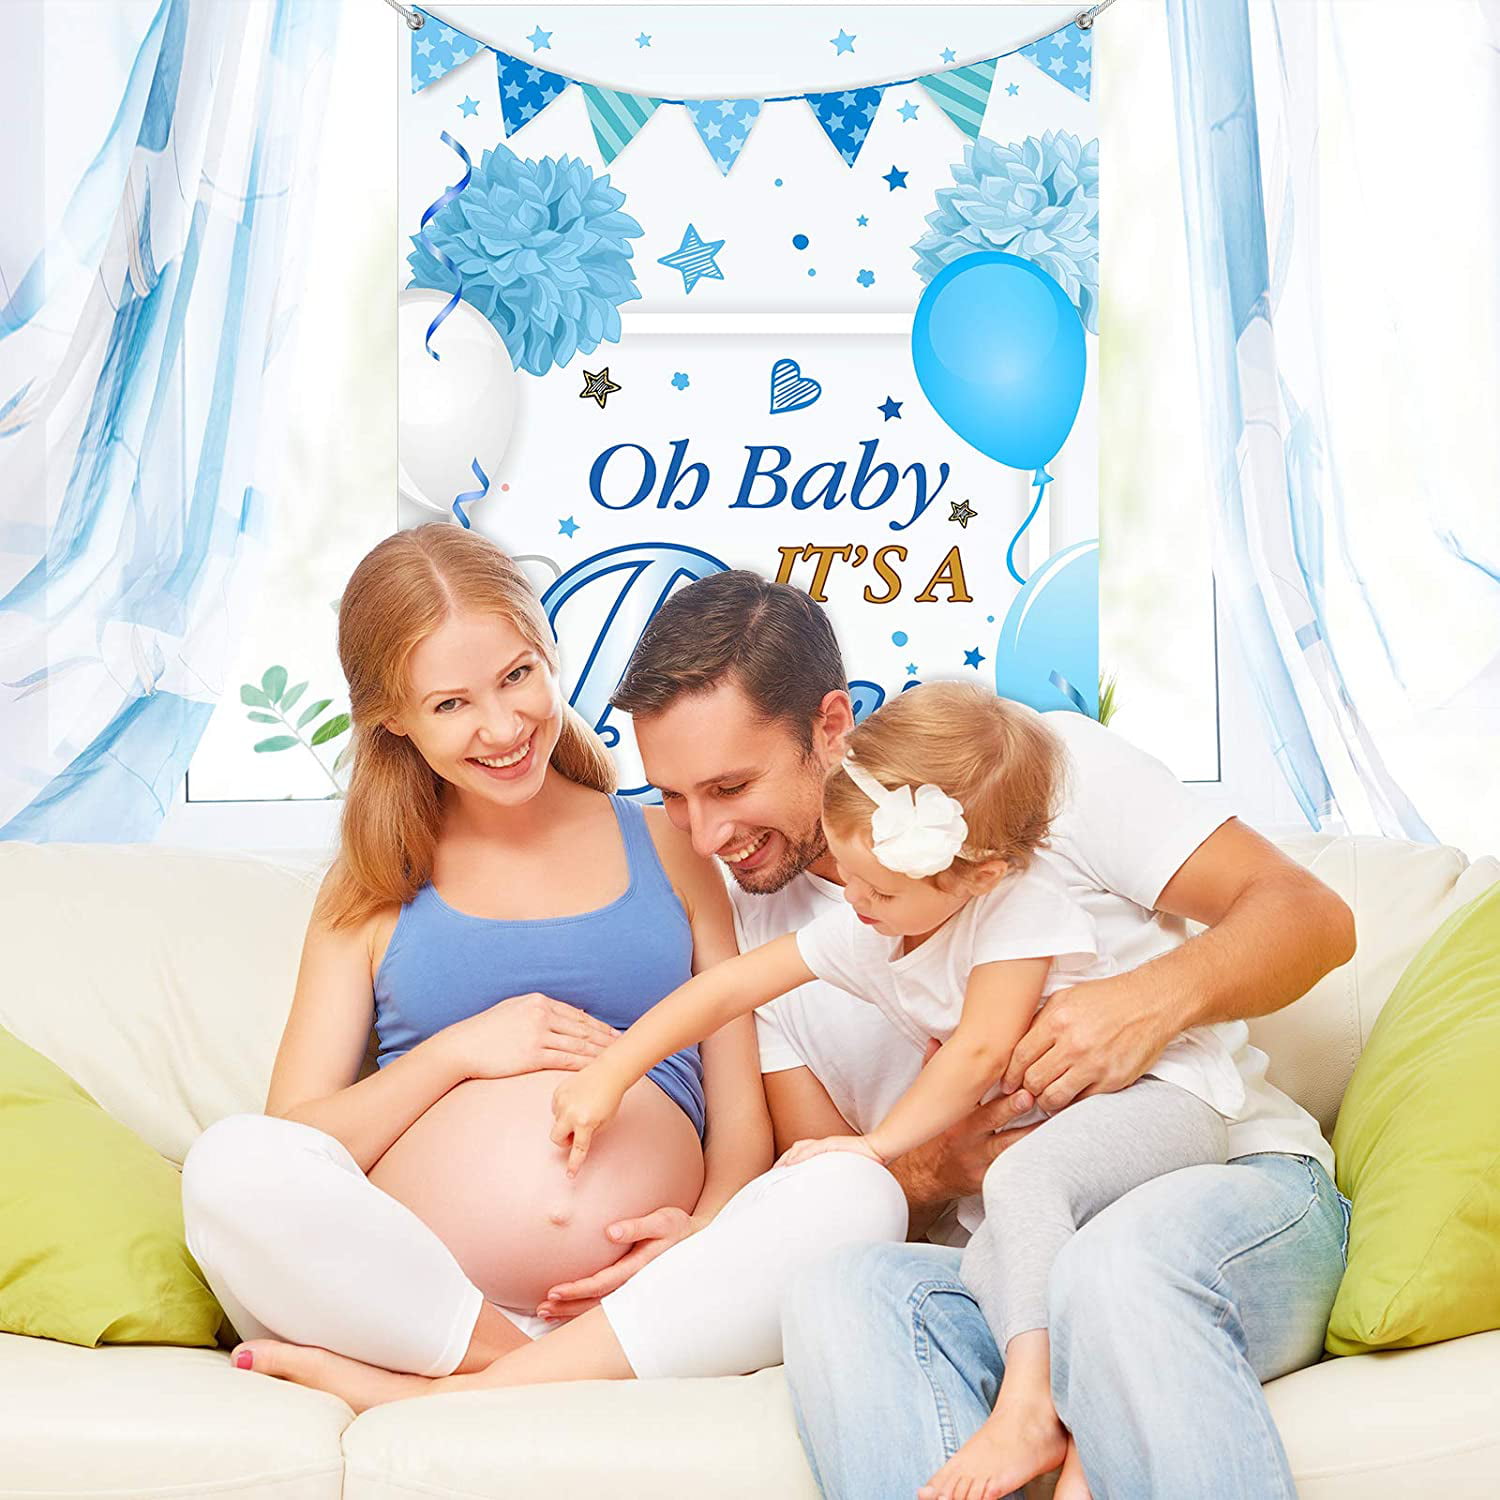 Its a Boy Baby Shower Banner Vinyl Photo Background Wall Hanging Party Decorations Backdrop HZ-1142